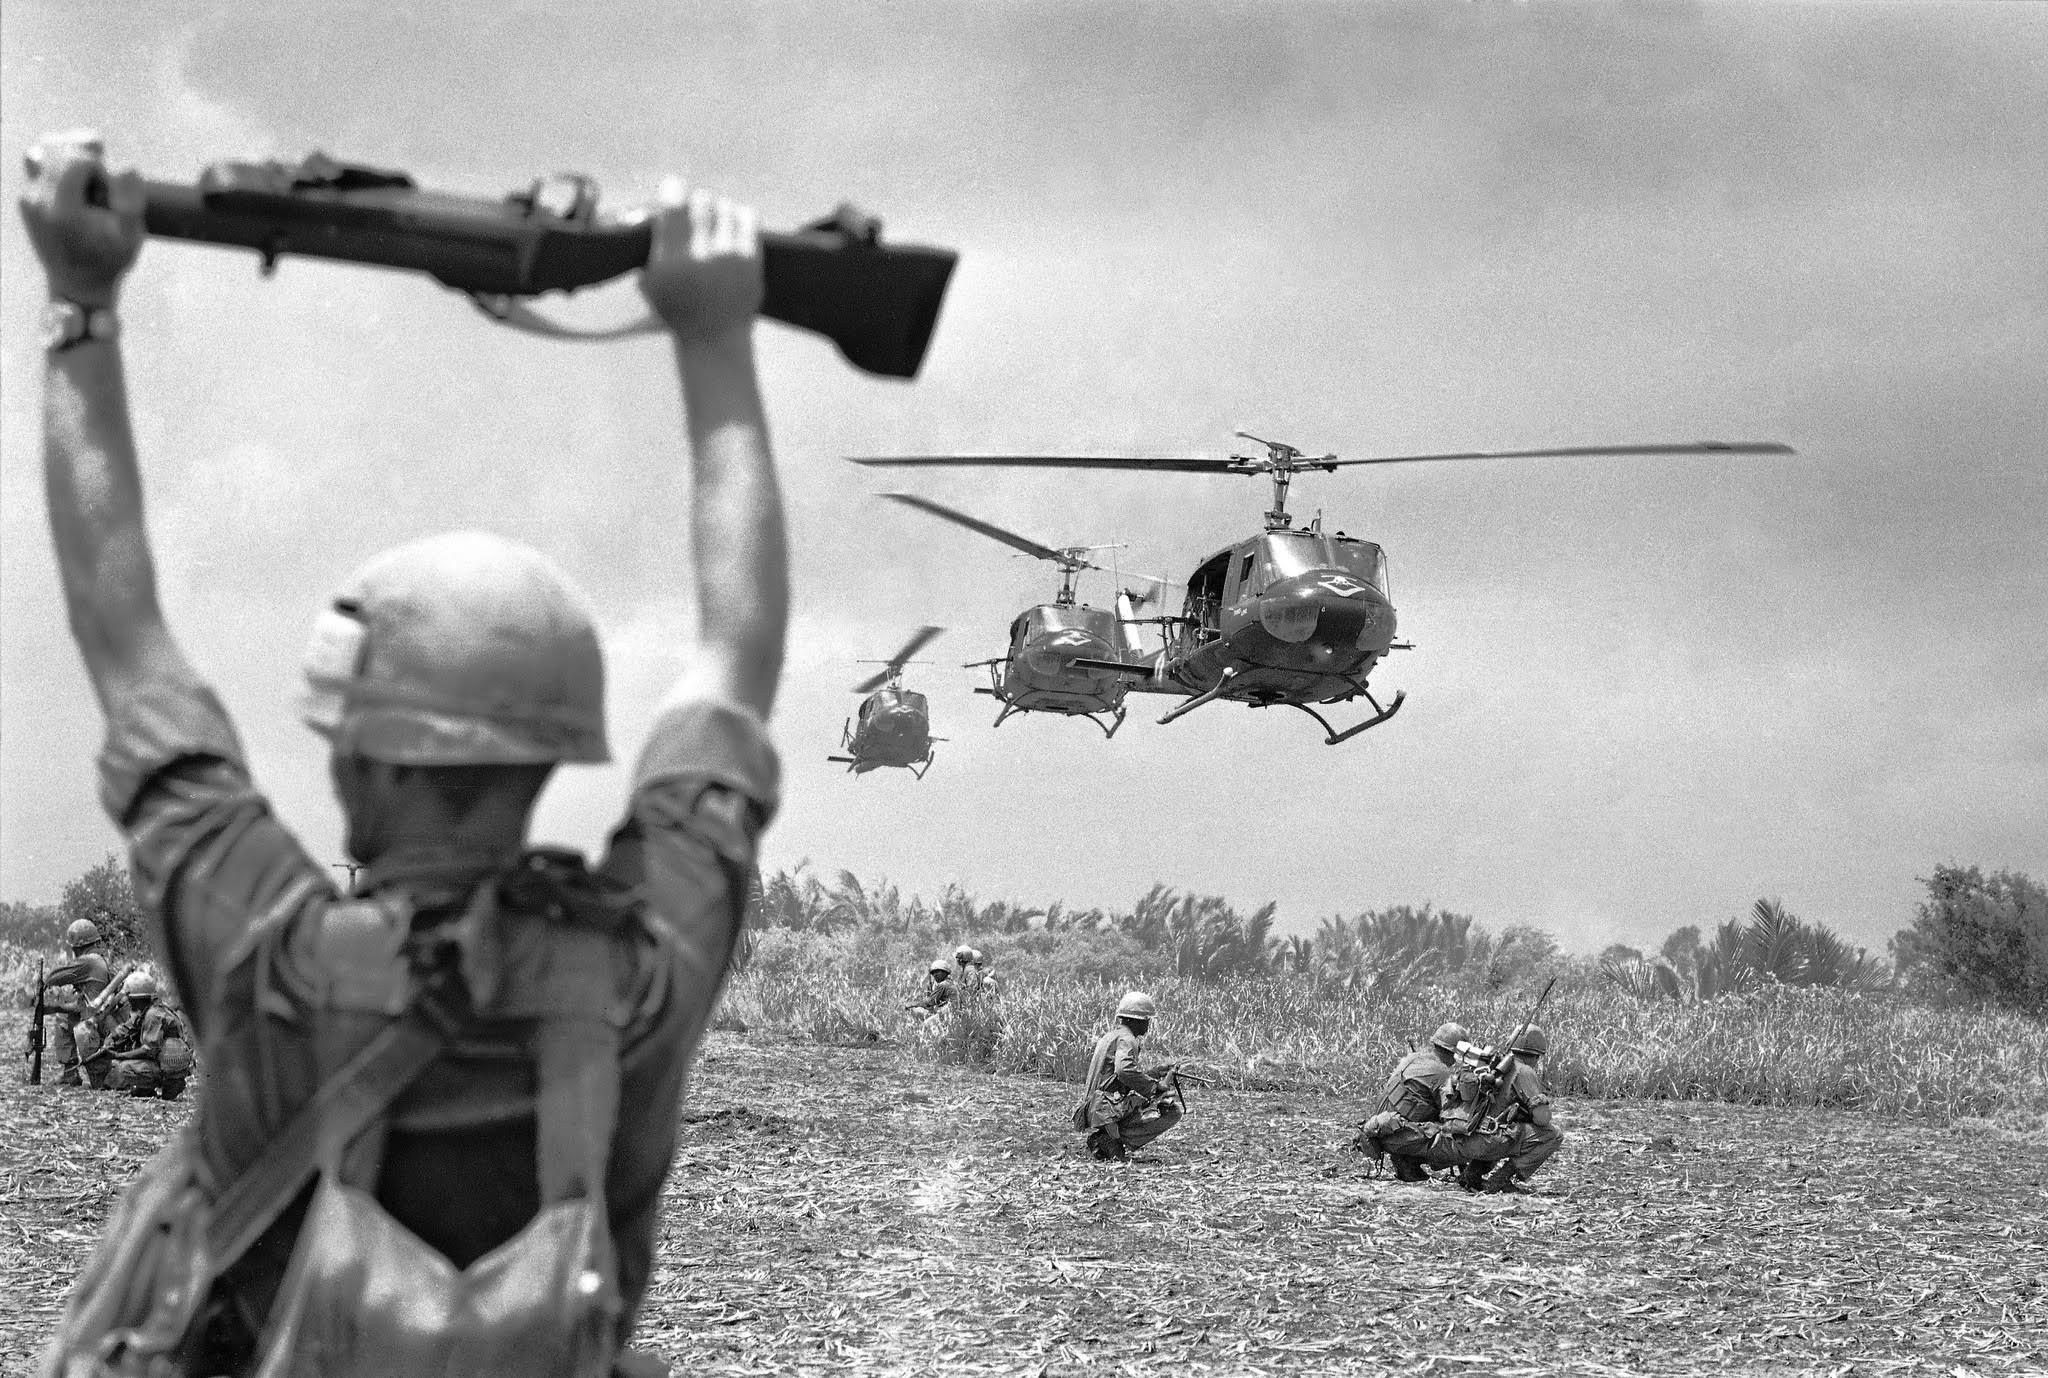 A U.S. soldier of the 9th Infantry Division uses an M79 grenade launcher to guide helicopters into an operation on the northern edge of South Vietnam's Mekong Delta in mid-July 1968. (Photo: Henri Huet / Associated Press)